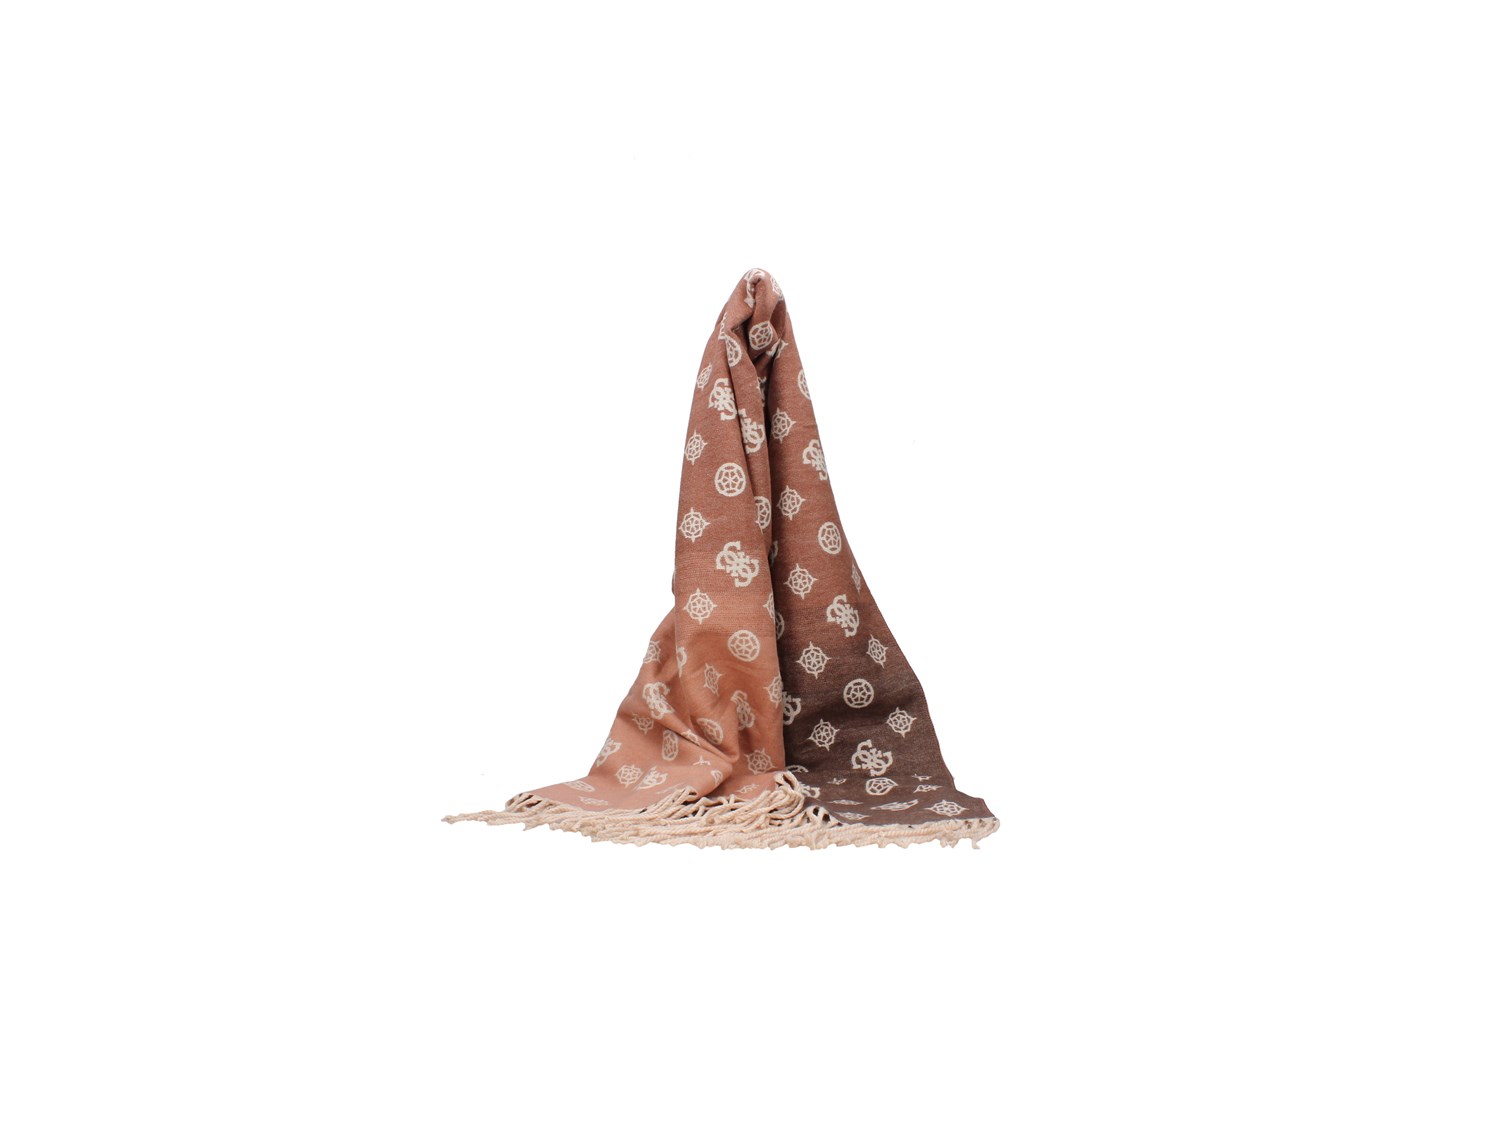 Guess Aw9031vis03 Camel Multi Accessories Women Scarf